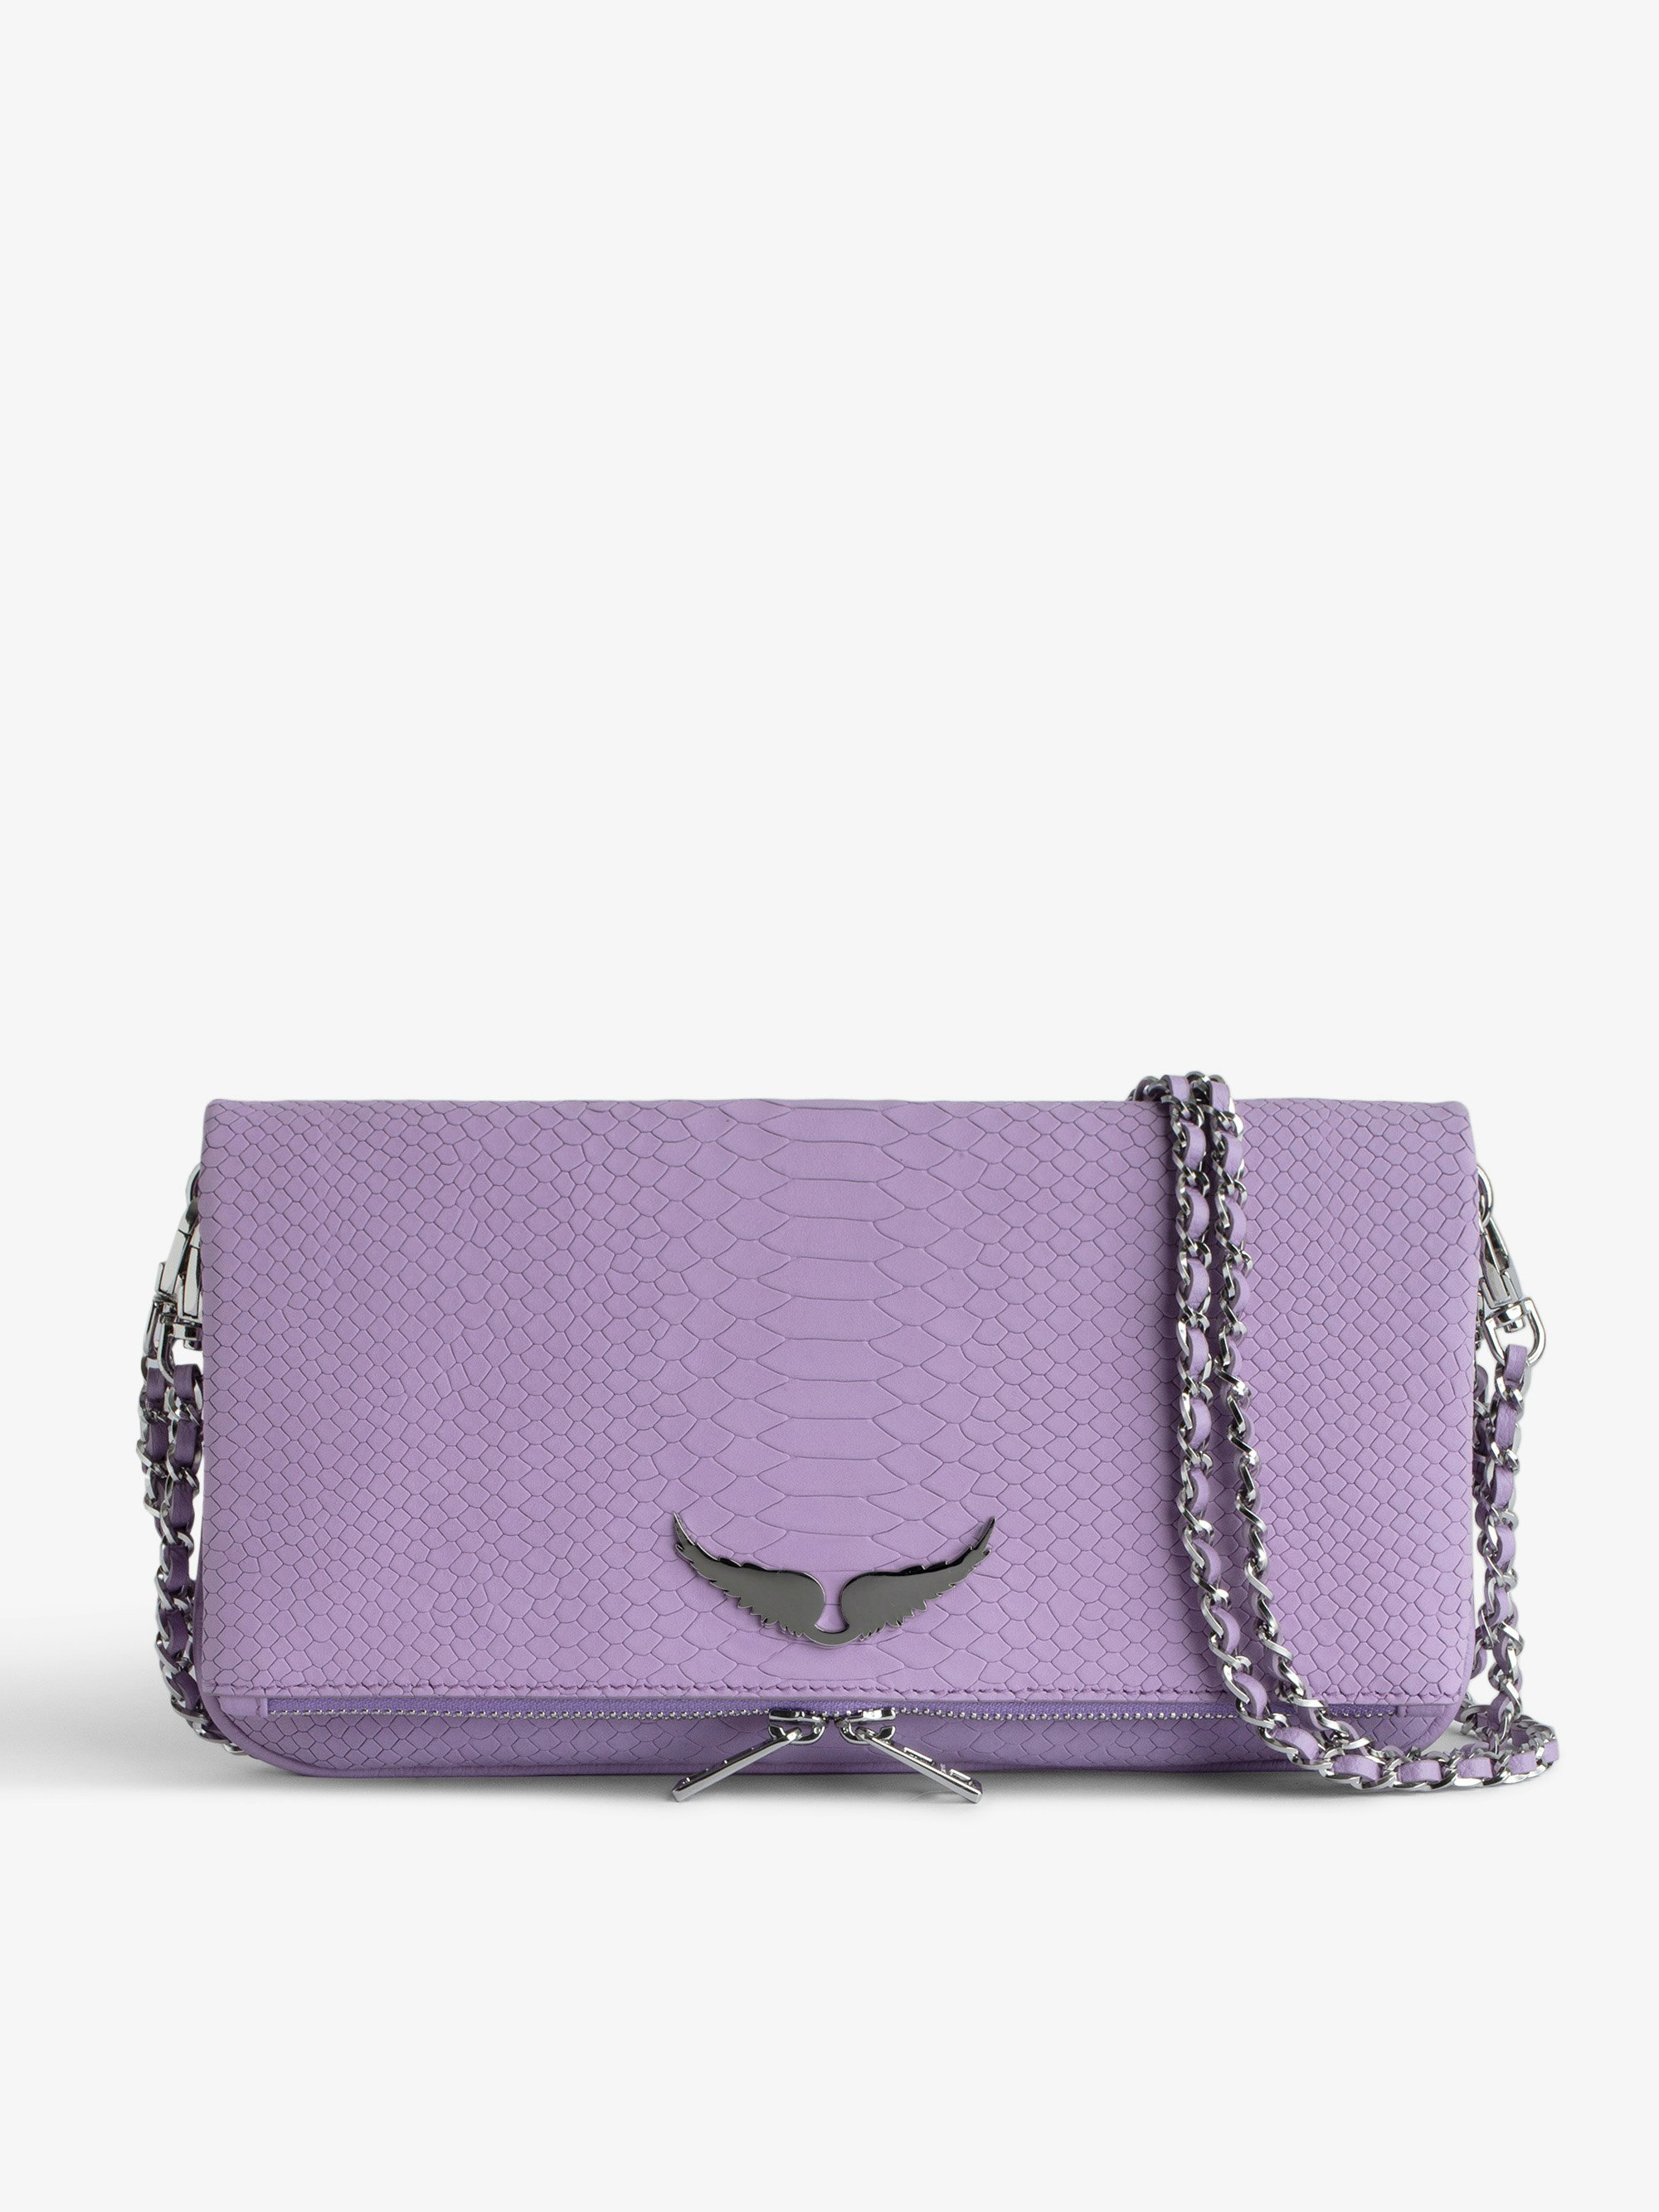 Rock Soft Savage Clutch - Purple python-effect leather clutch with double leather and metal chain strap.